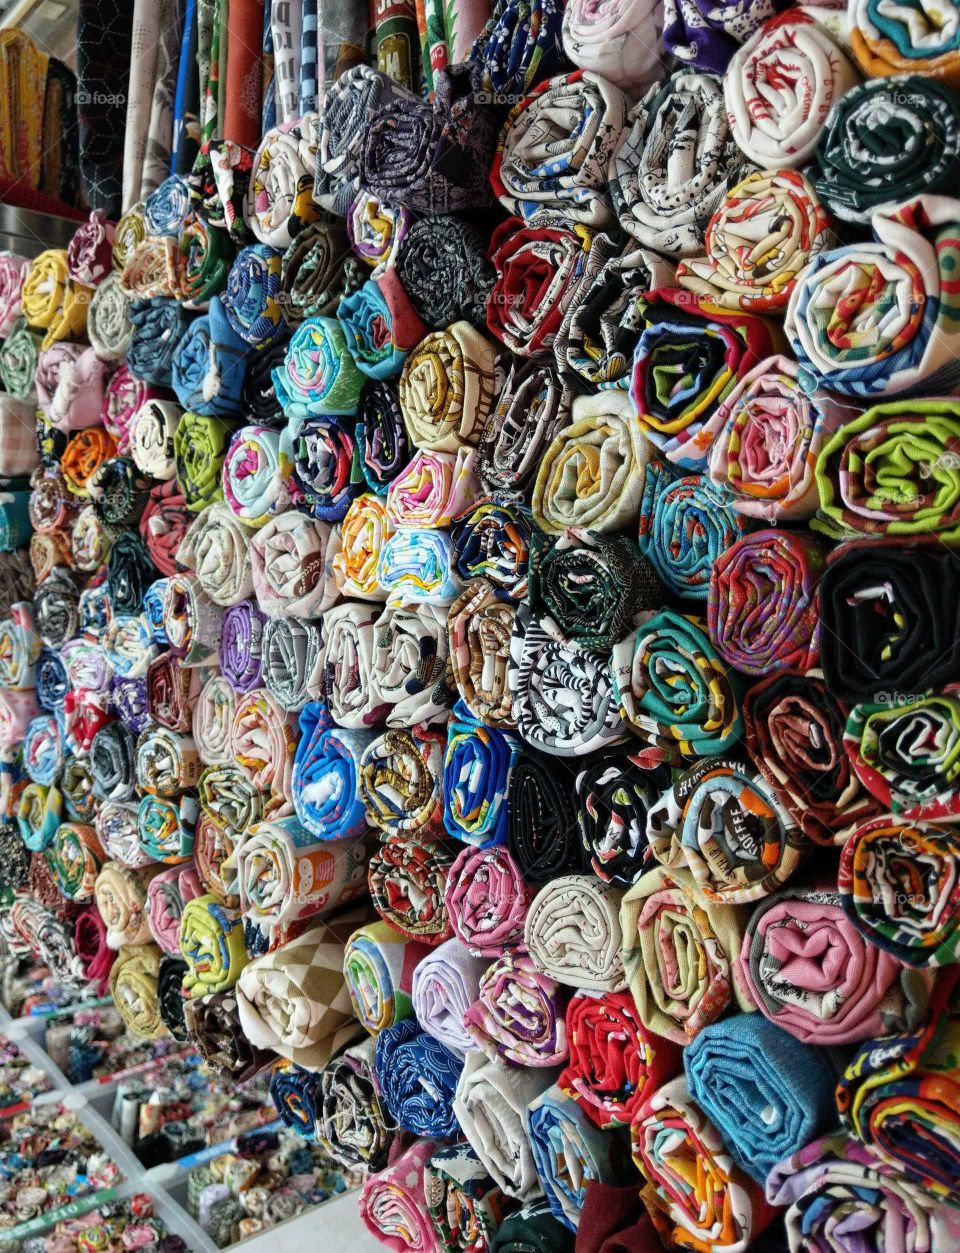 Various cloths in the traditional cloth store that roll up in cylindrical shape. they have various colors, so bright, beautiful and colorful. very special patterns.